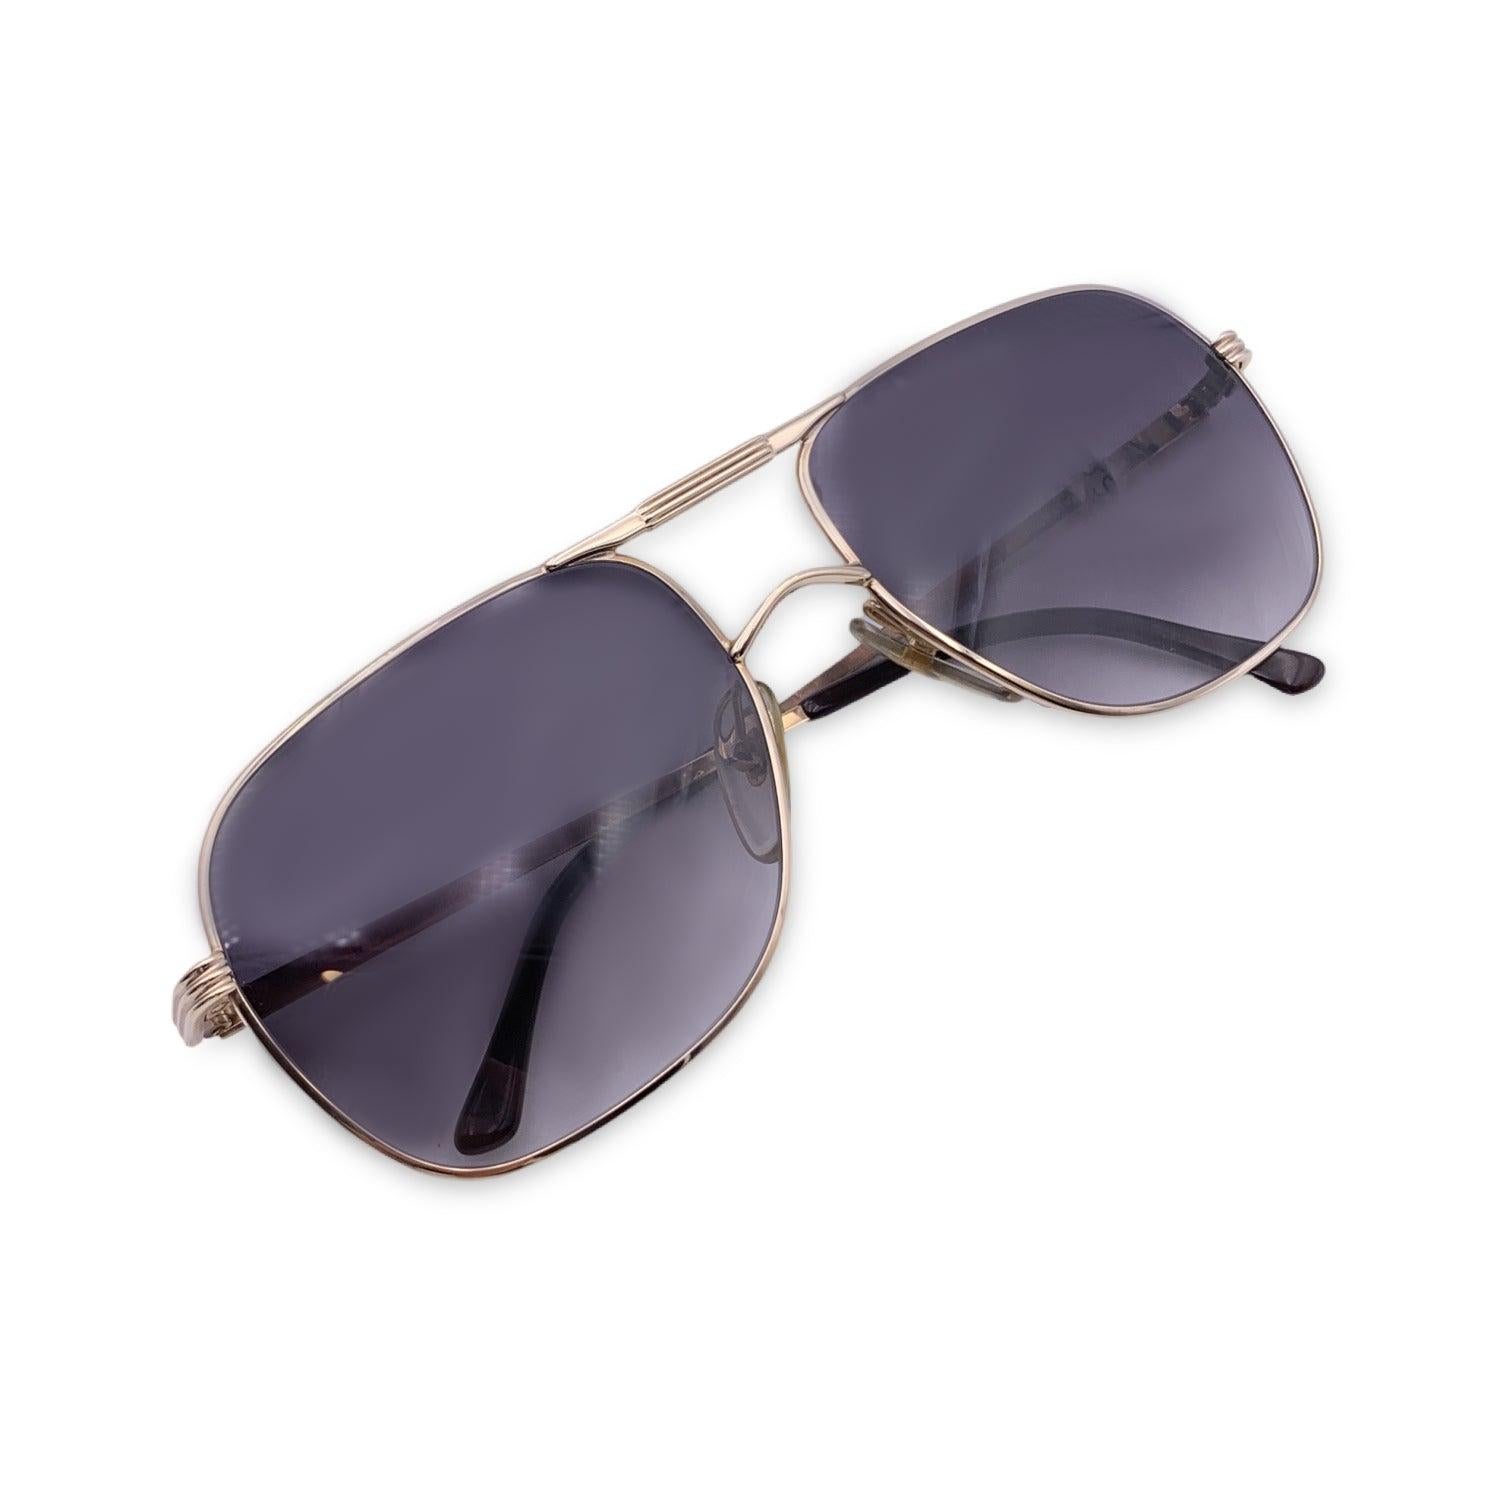 Vintage Christian Dior Monsieur Unisex Sunglasses from the 1980s. Mod. 2443 40. Size: 59/18 135mm. Gold metal frame with dark brown finish. 100% Total UVA/UVB protection grey gradient lenses. CD logos on the side of the temples. Details MATERIAL: